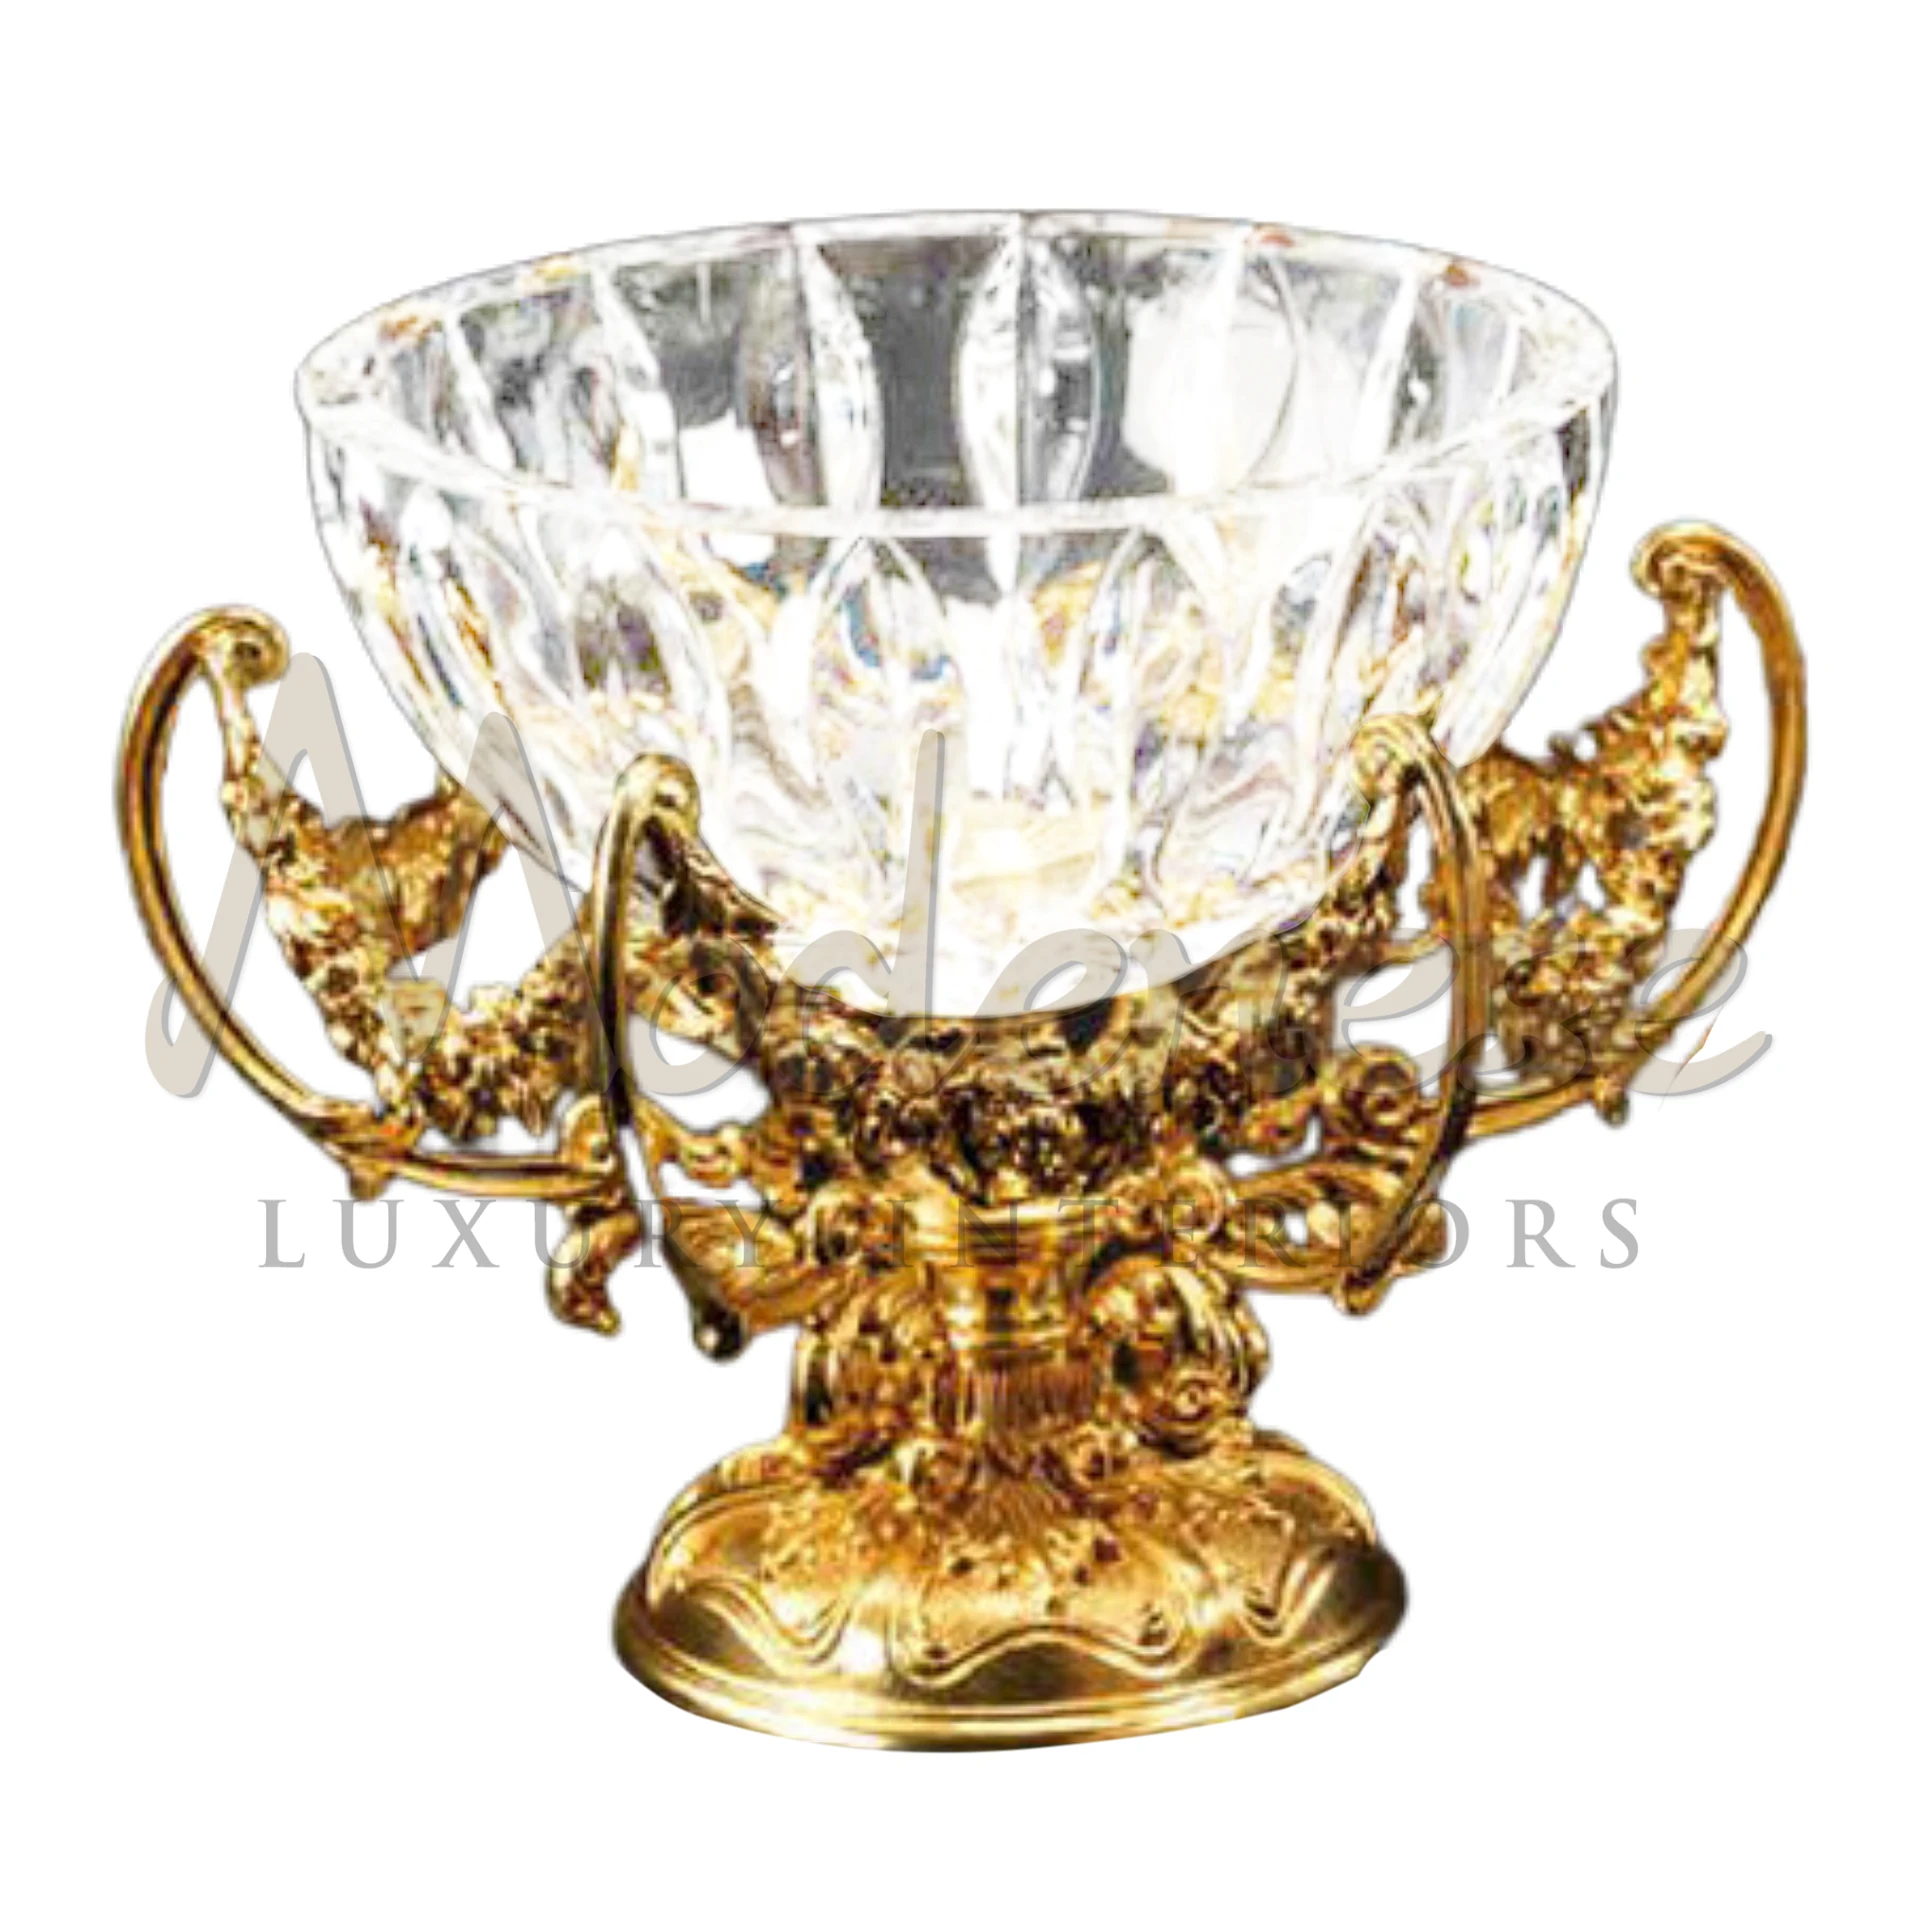 Modenese Extravagant Crystal Gold Elements Bowl, a luxurious blend of detailed crystal and ornate gold.